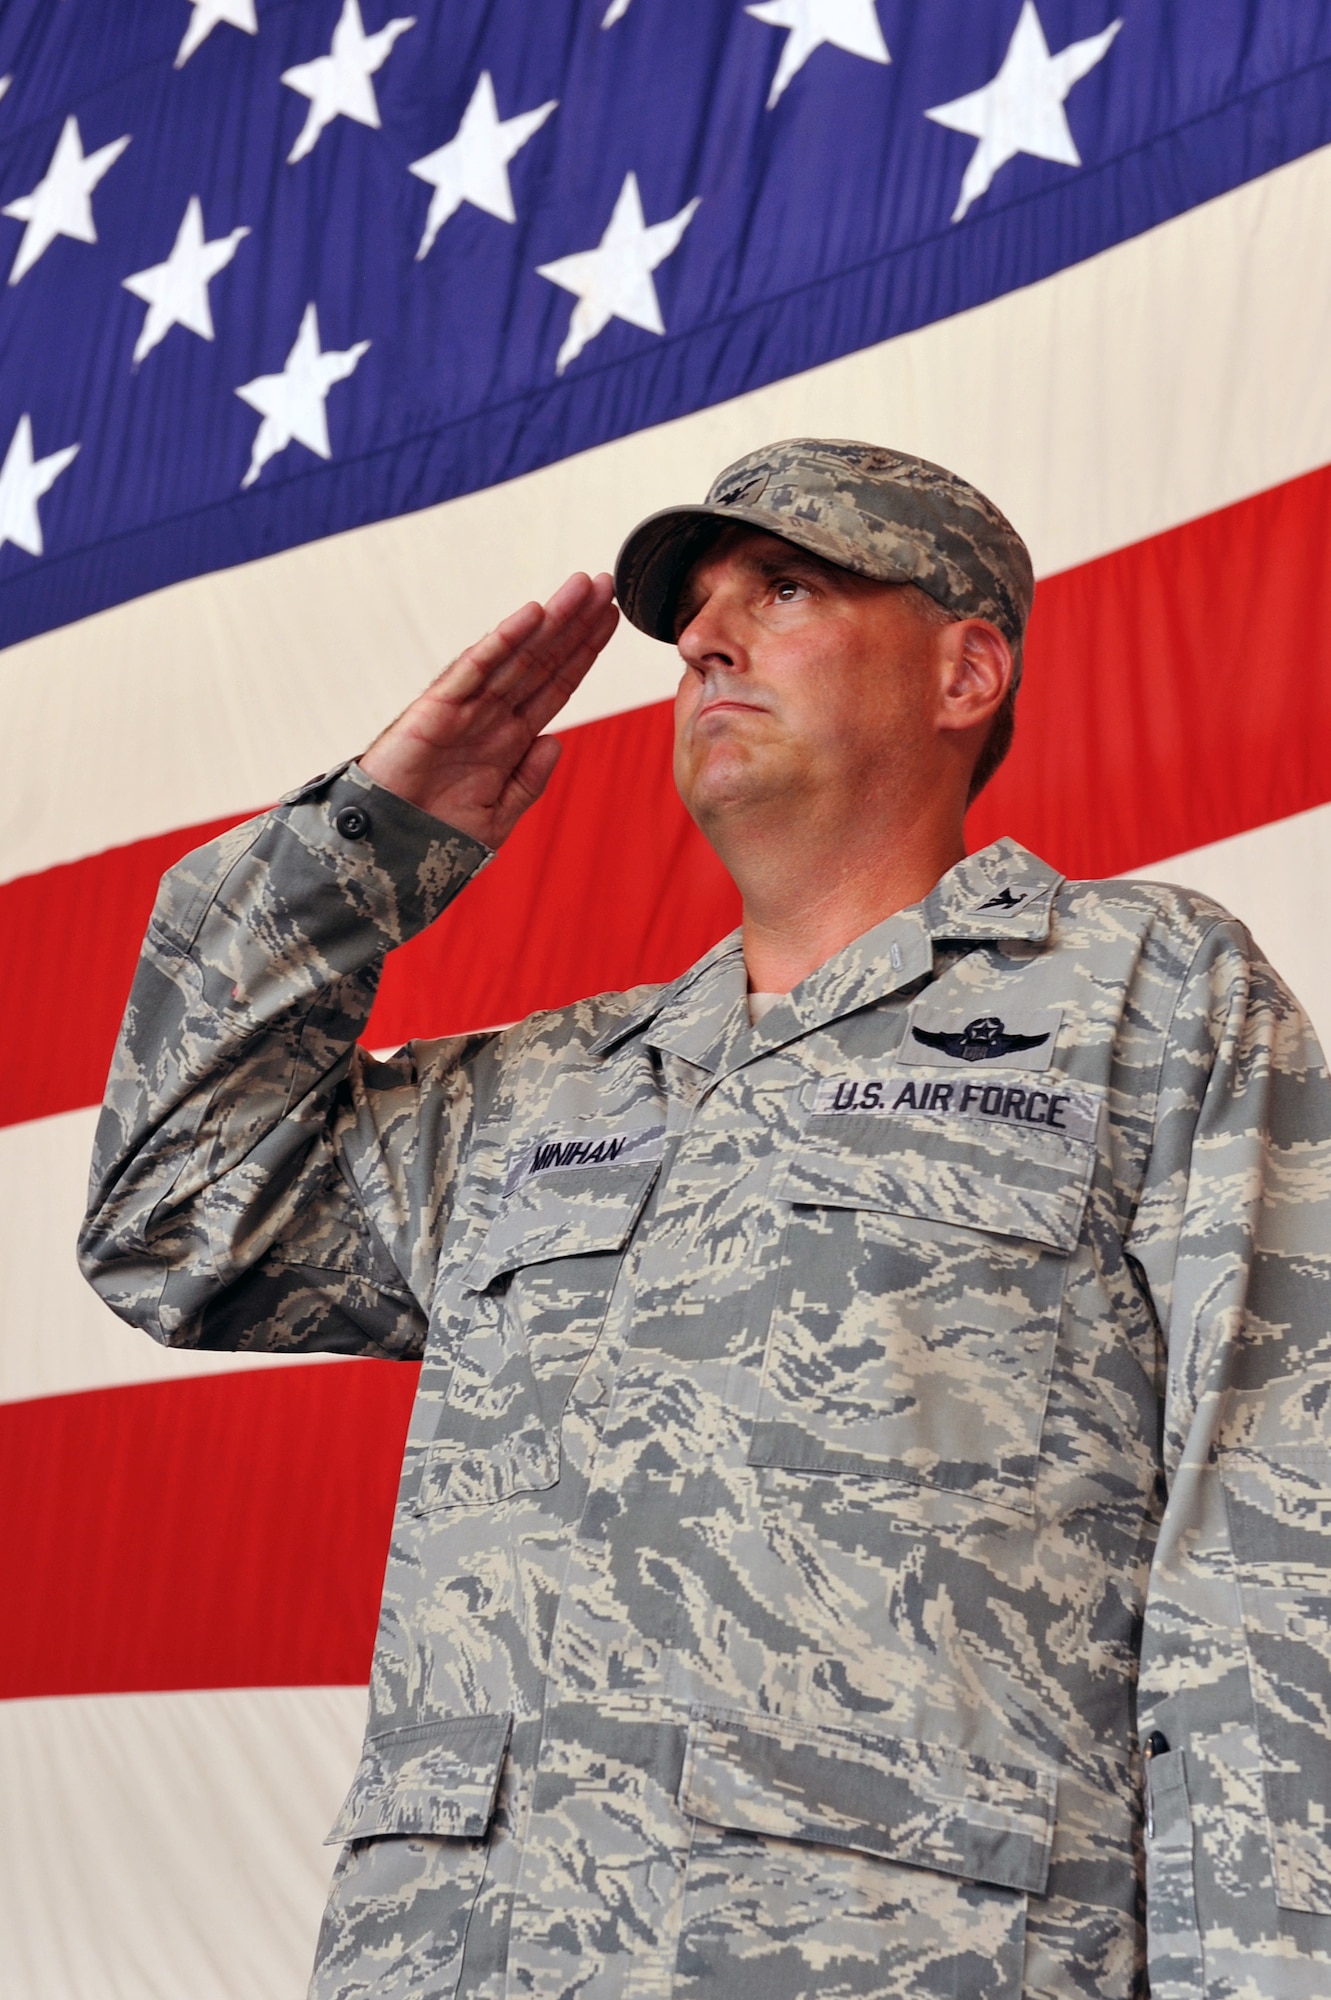 Col. Michael Minihan, 19th Airlift Wing commander, gives his first salute to the 19th AW during a change of command ceremony here Aug. 2.  The 19th AW is the host unit to the largest C-130 base in the world.  (U.S. Air Force photo by Staff Sgt. Chris Willis)